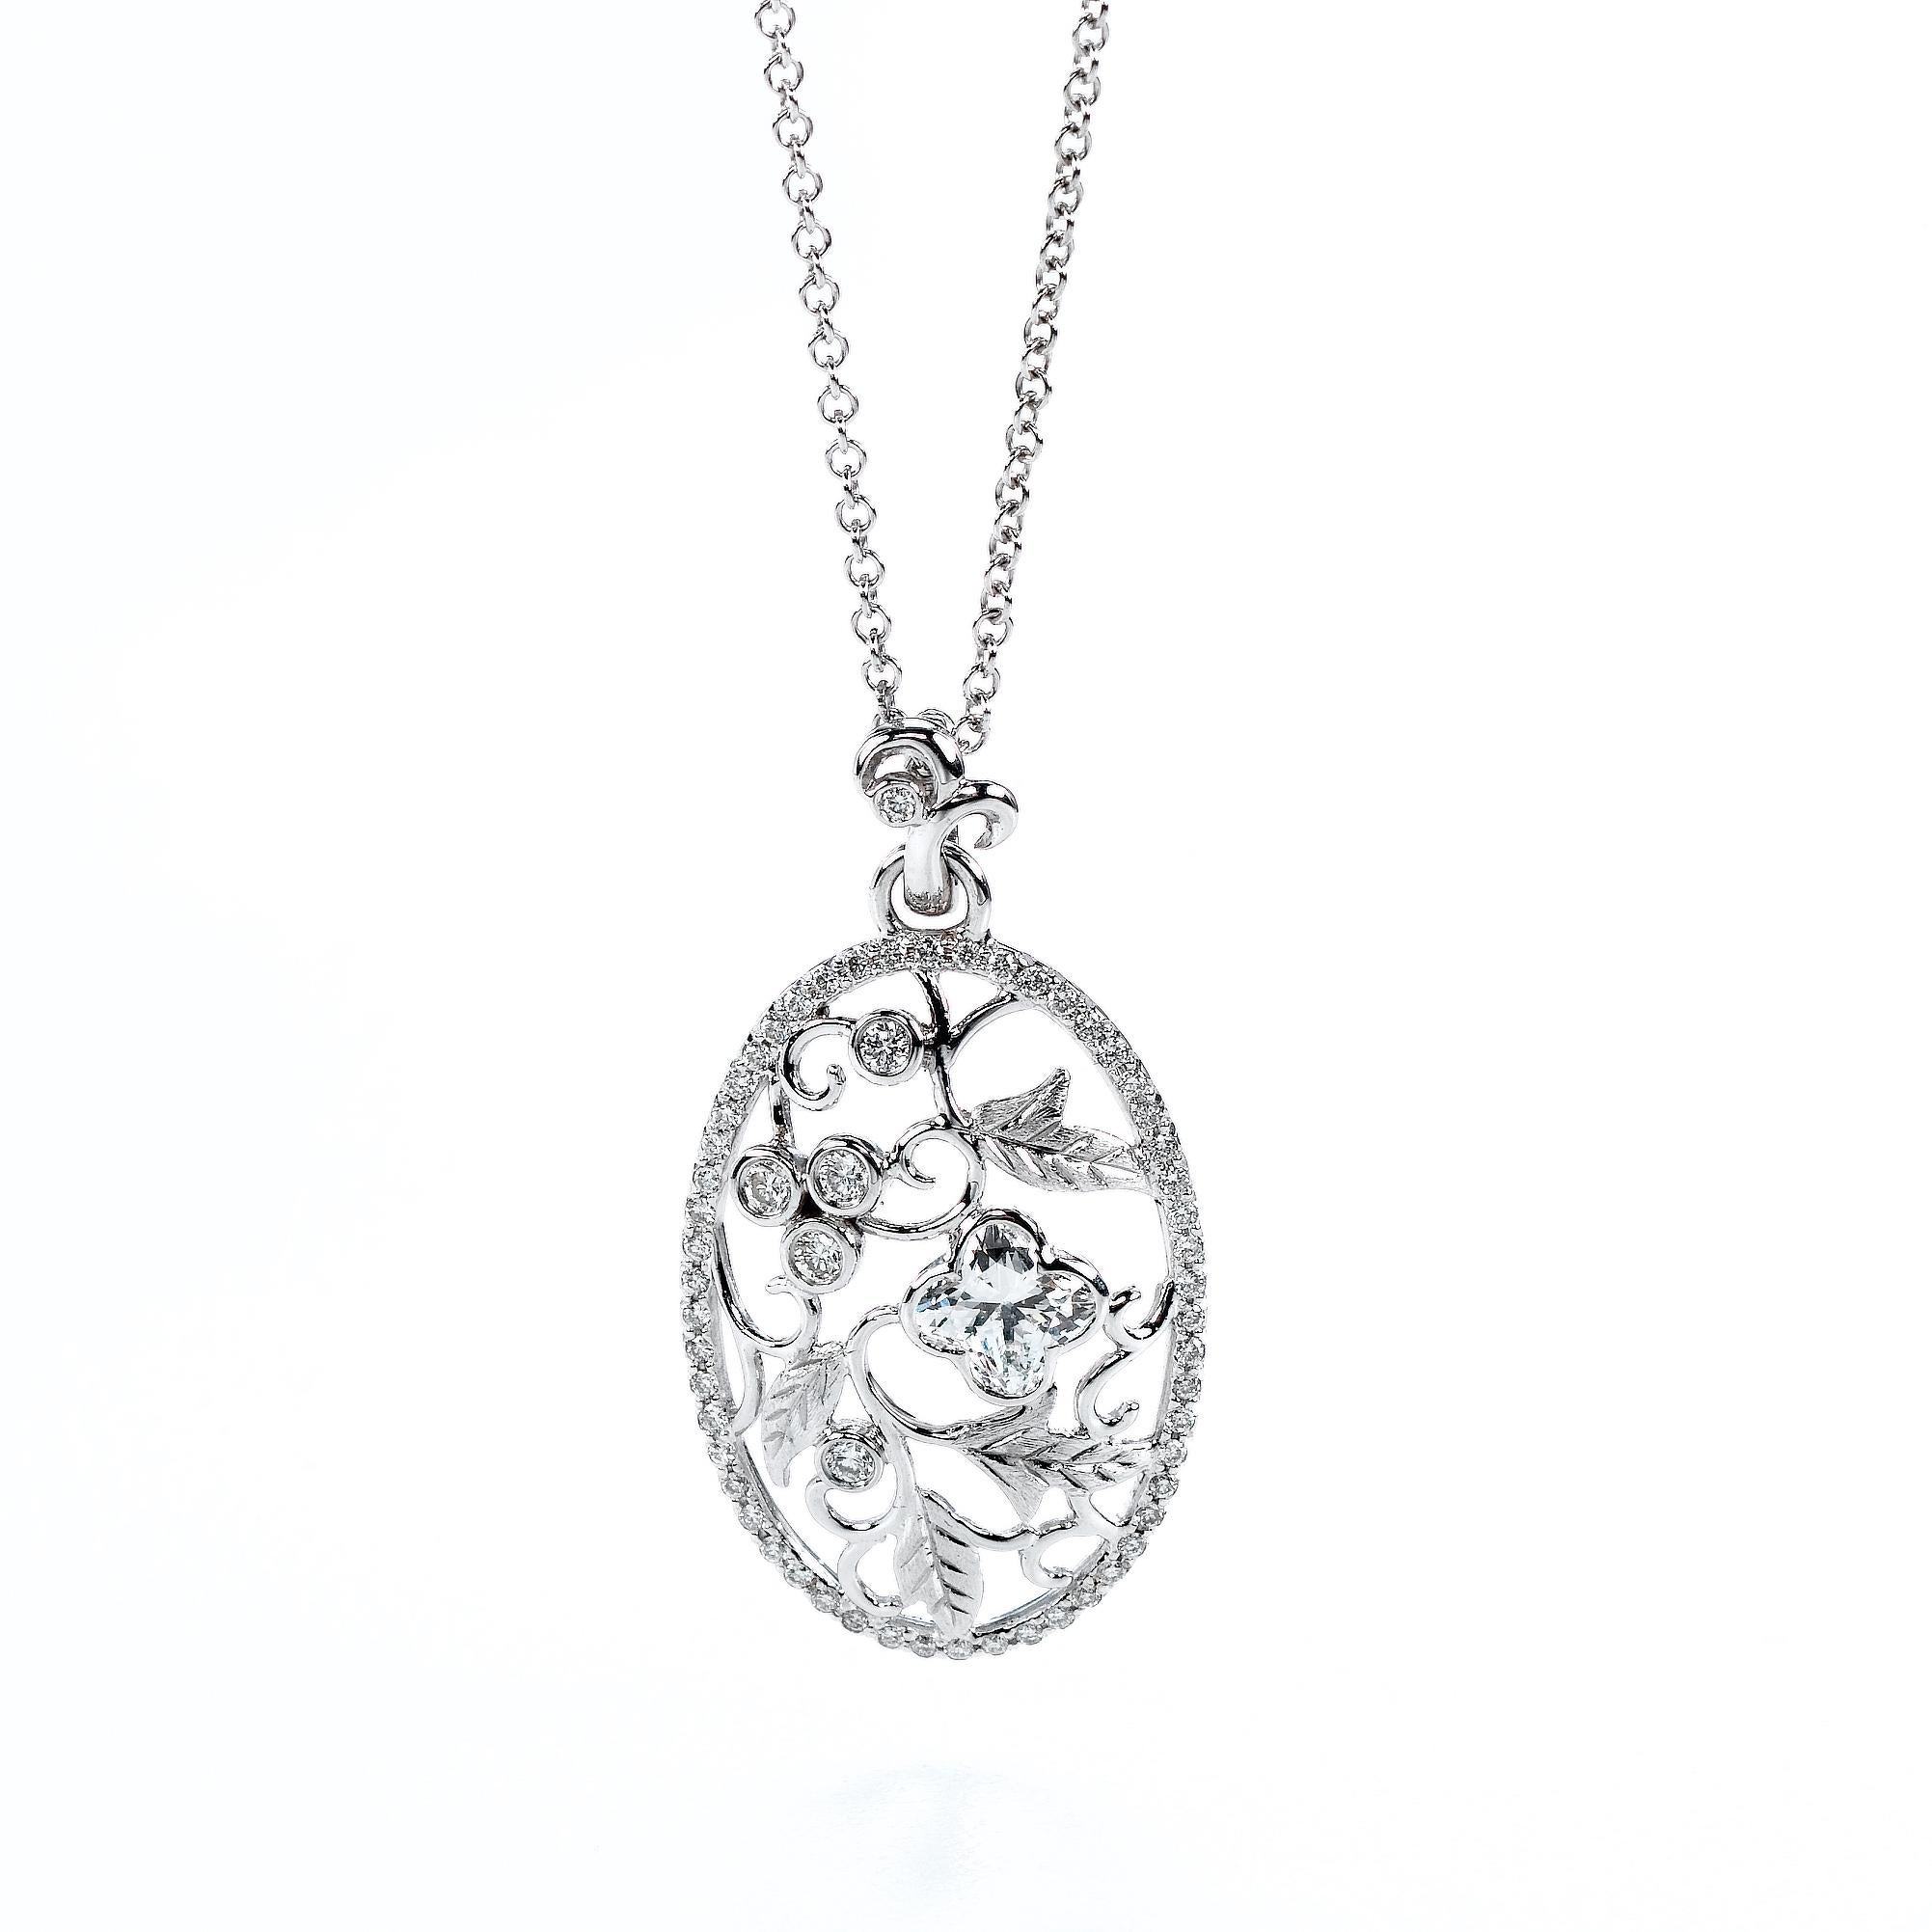 18KT white gold bouquet  diamond flower pendant.  .1 LILY CUT ® flower shape diamond H color VS SI clarity  0.23cts . additional 0.07 ct round diamond accent . overall length of drop 1 inch. 2.5 cm .  overall size 17 inch necklace with a 1 inch